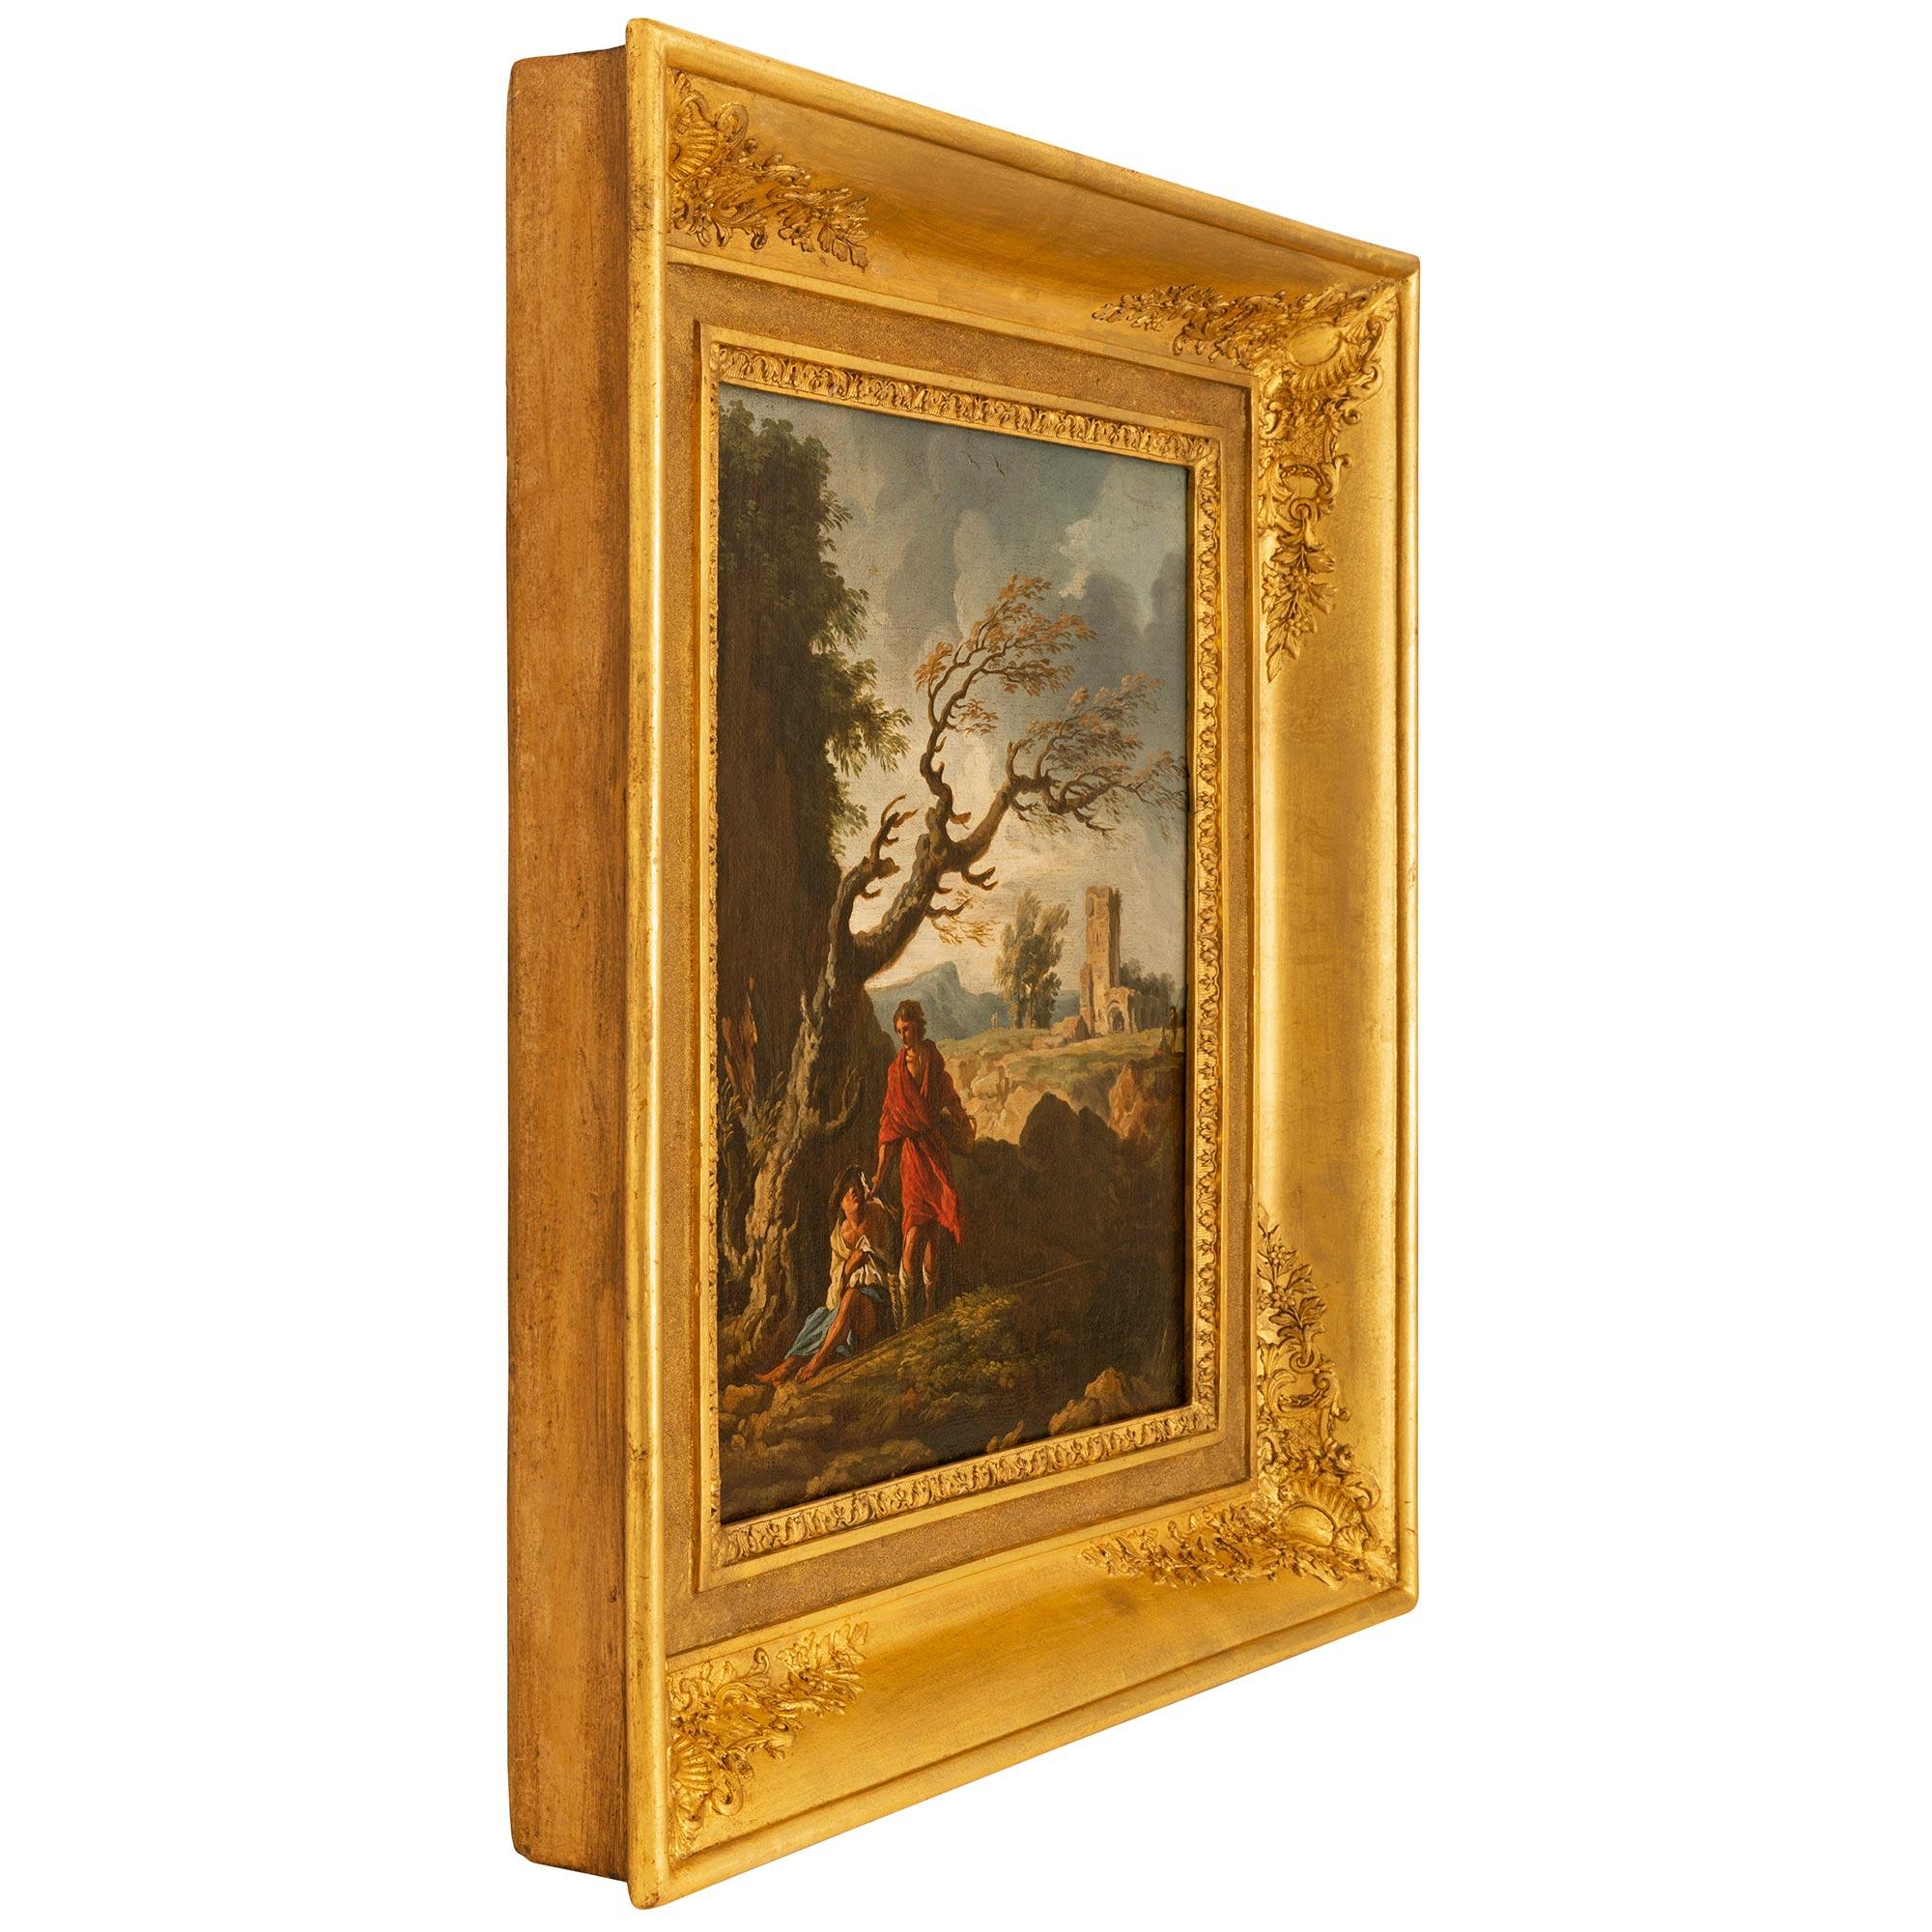 An exceptional and extremely decorative Continental 18th century oil on canvas painting in its original giltwood frame. The wonderfully executed painting depicts a handsome young man in a flowing red garment handing a fish to a man on the ground who